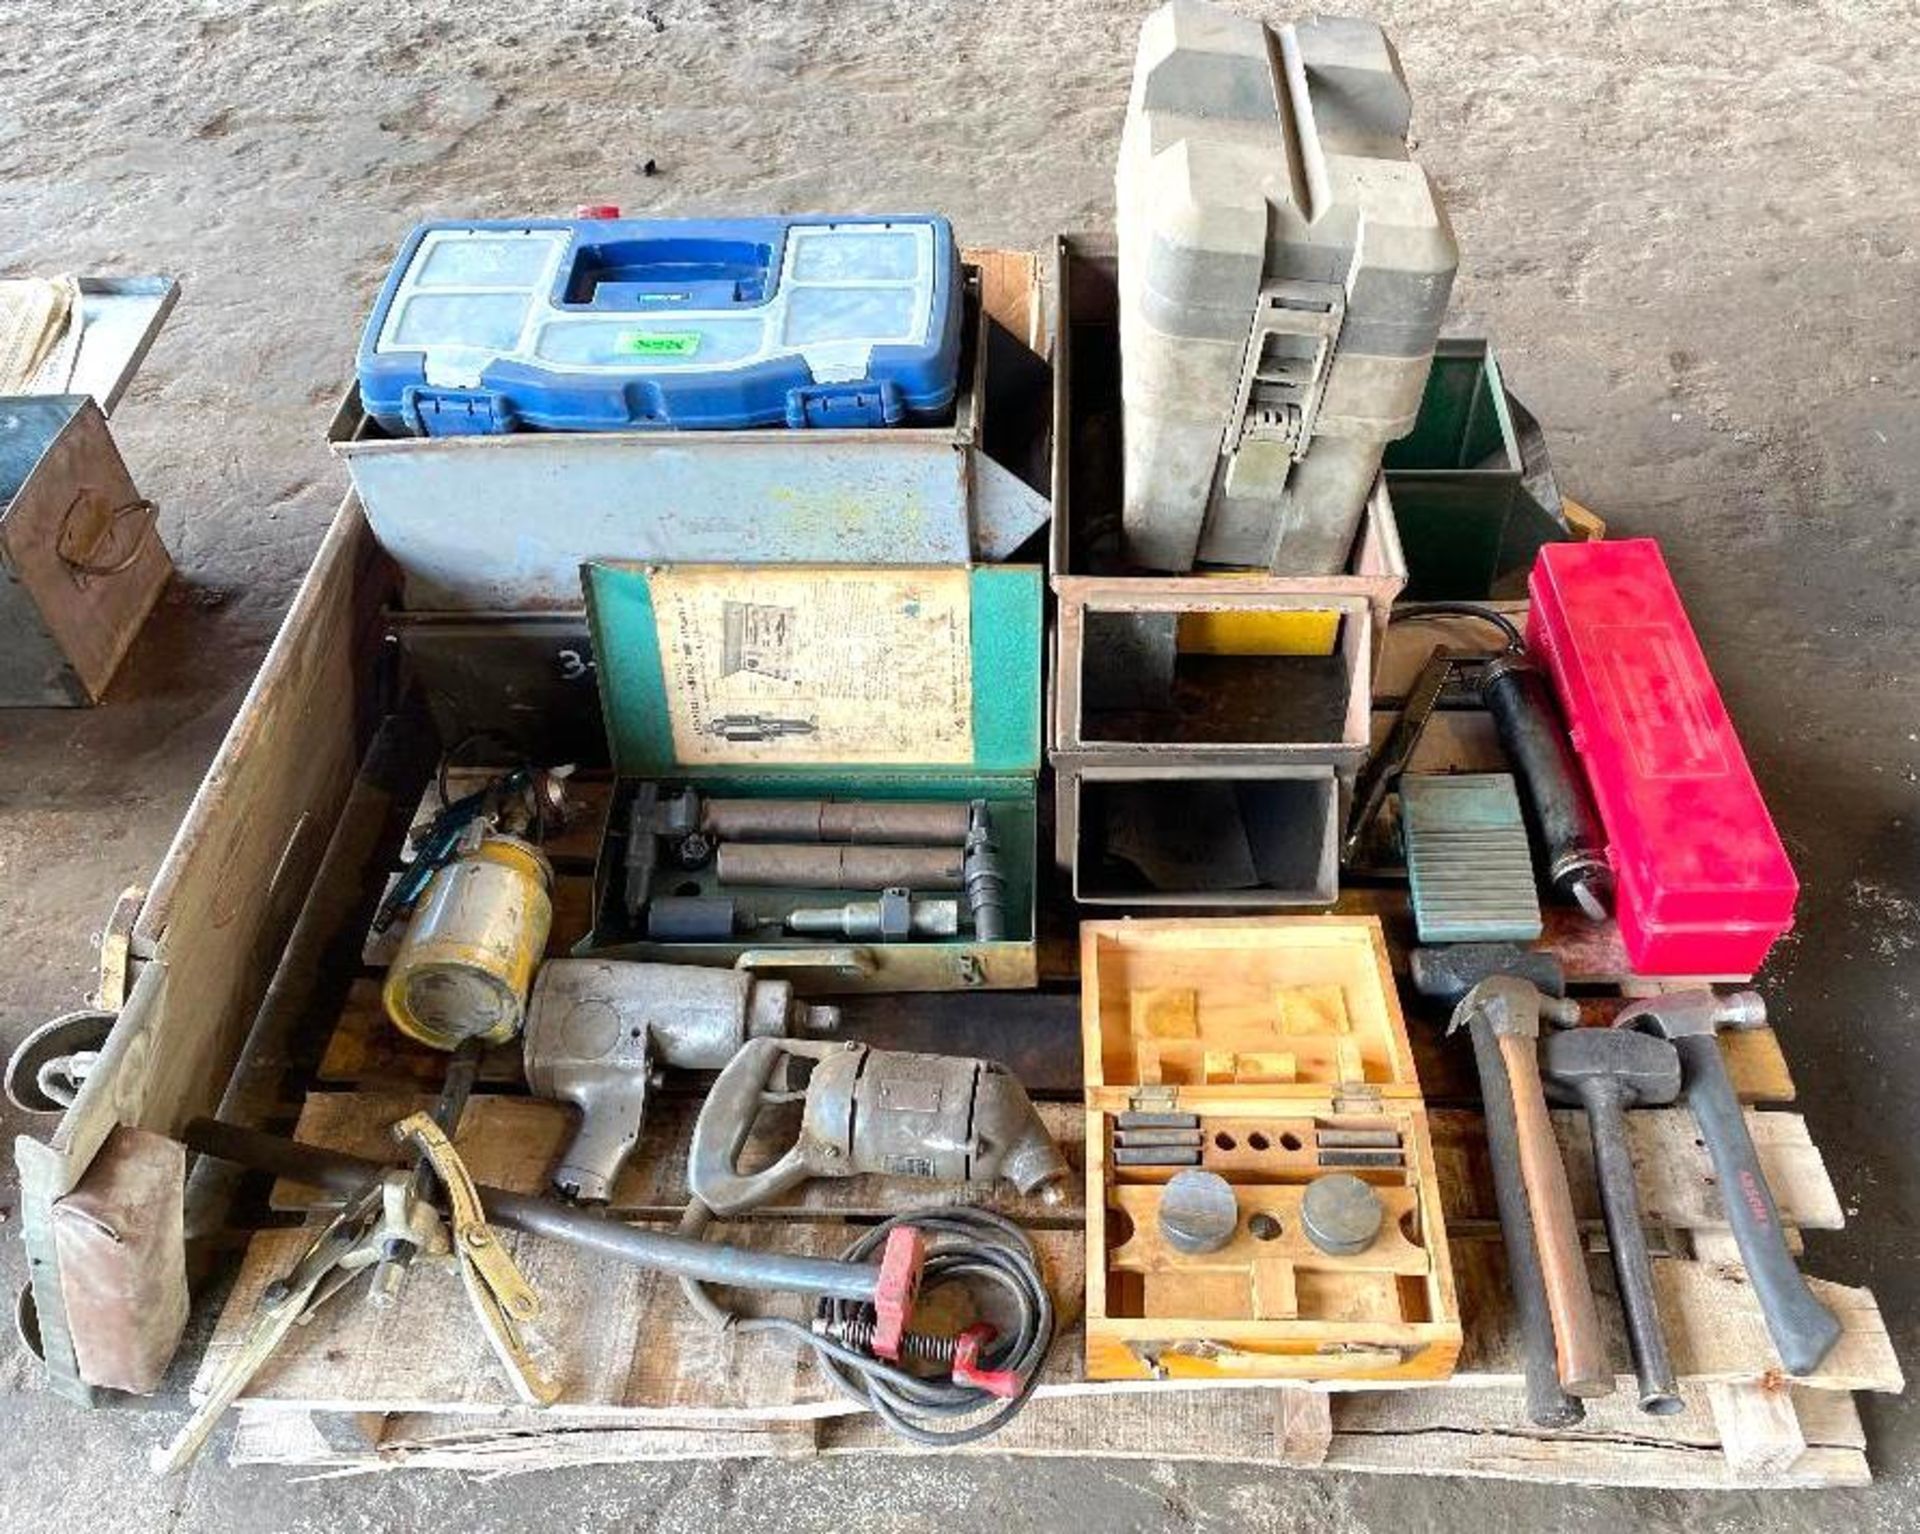 DESCRIPTION CONTENTS OF PALLET (VARIOUS TOOLS AS SHOWN) THIS LOT IS ONE MONEY QUANTITY 1